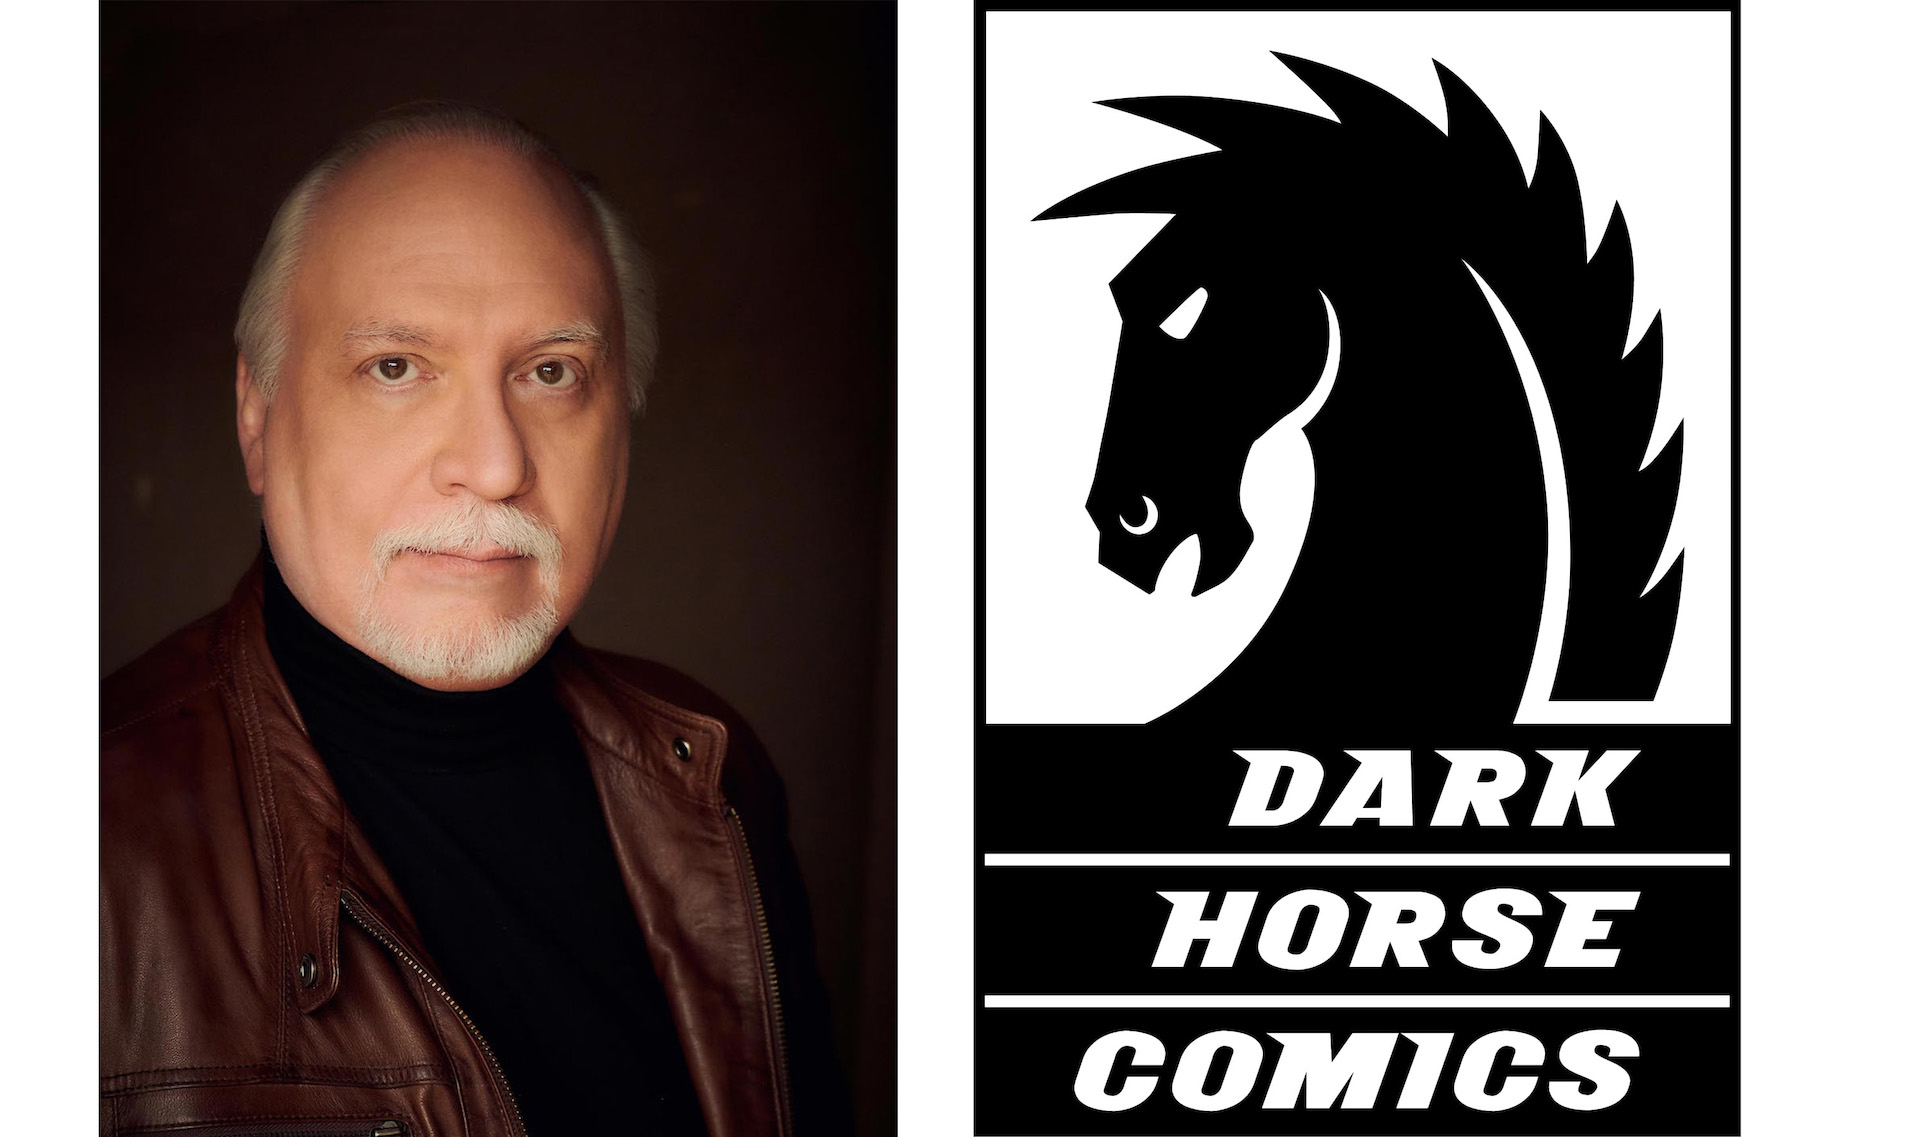 J. Michael Straczynski and Dark Horse join forces to 'build new worlds'